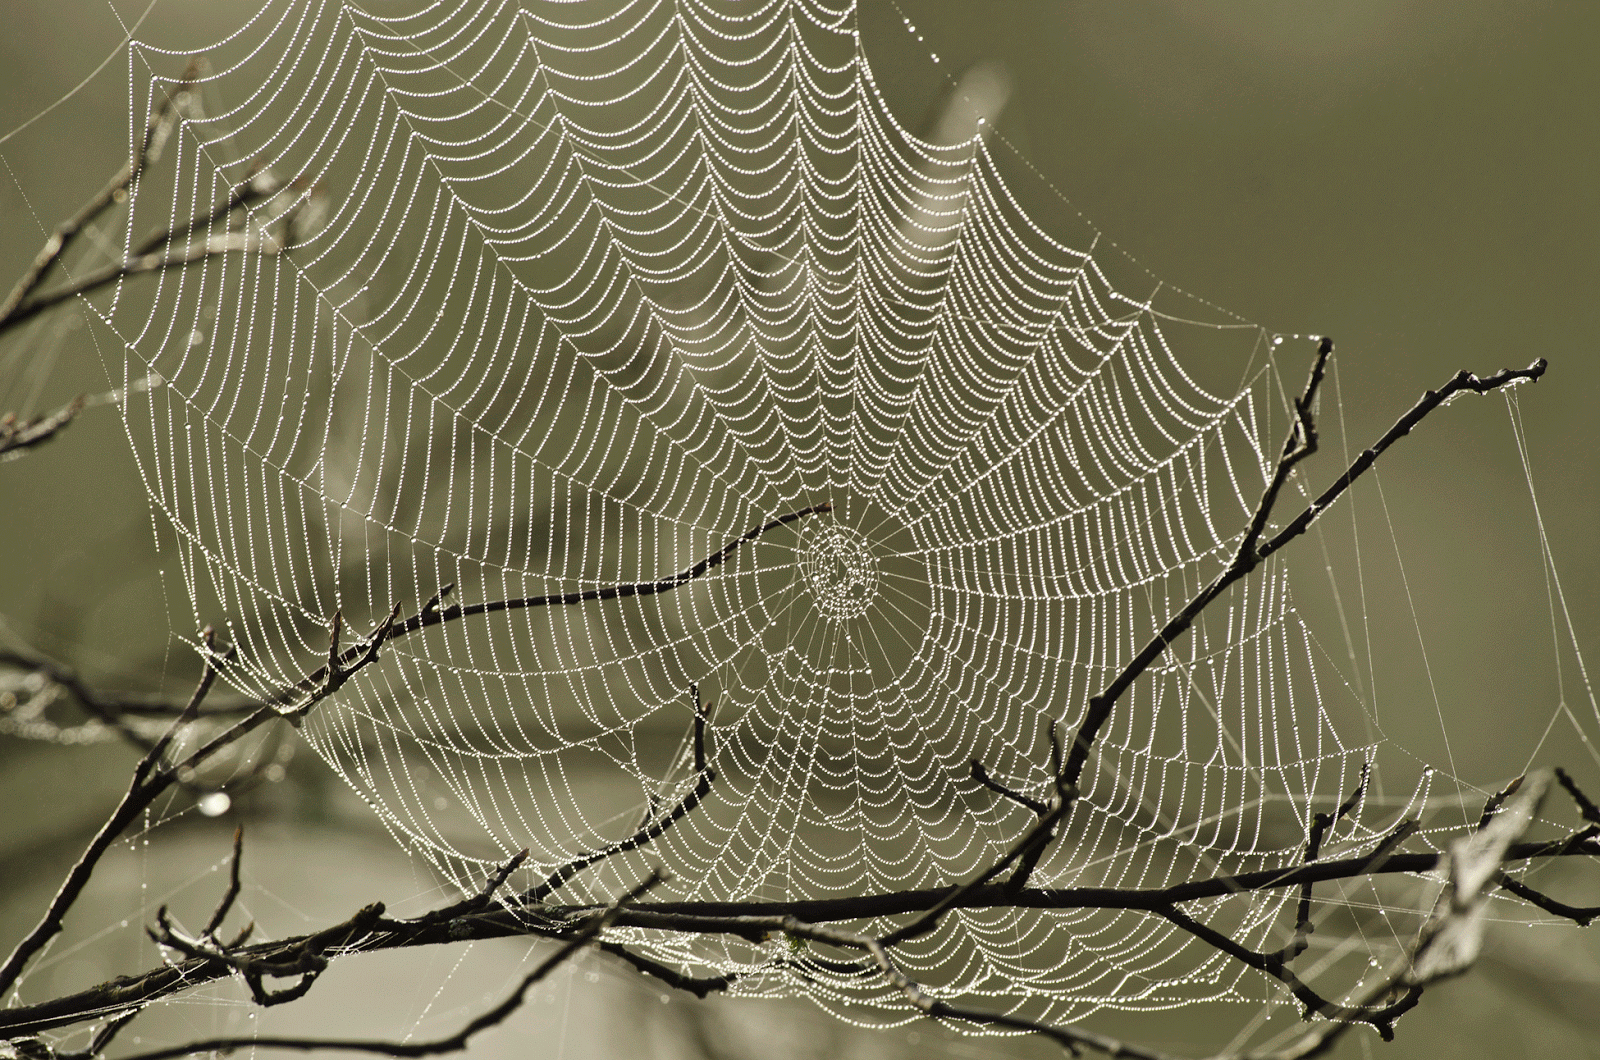 Gallery Photos of "Dew On Spider Web" .